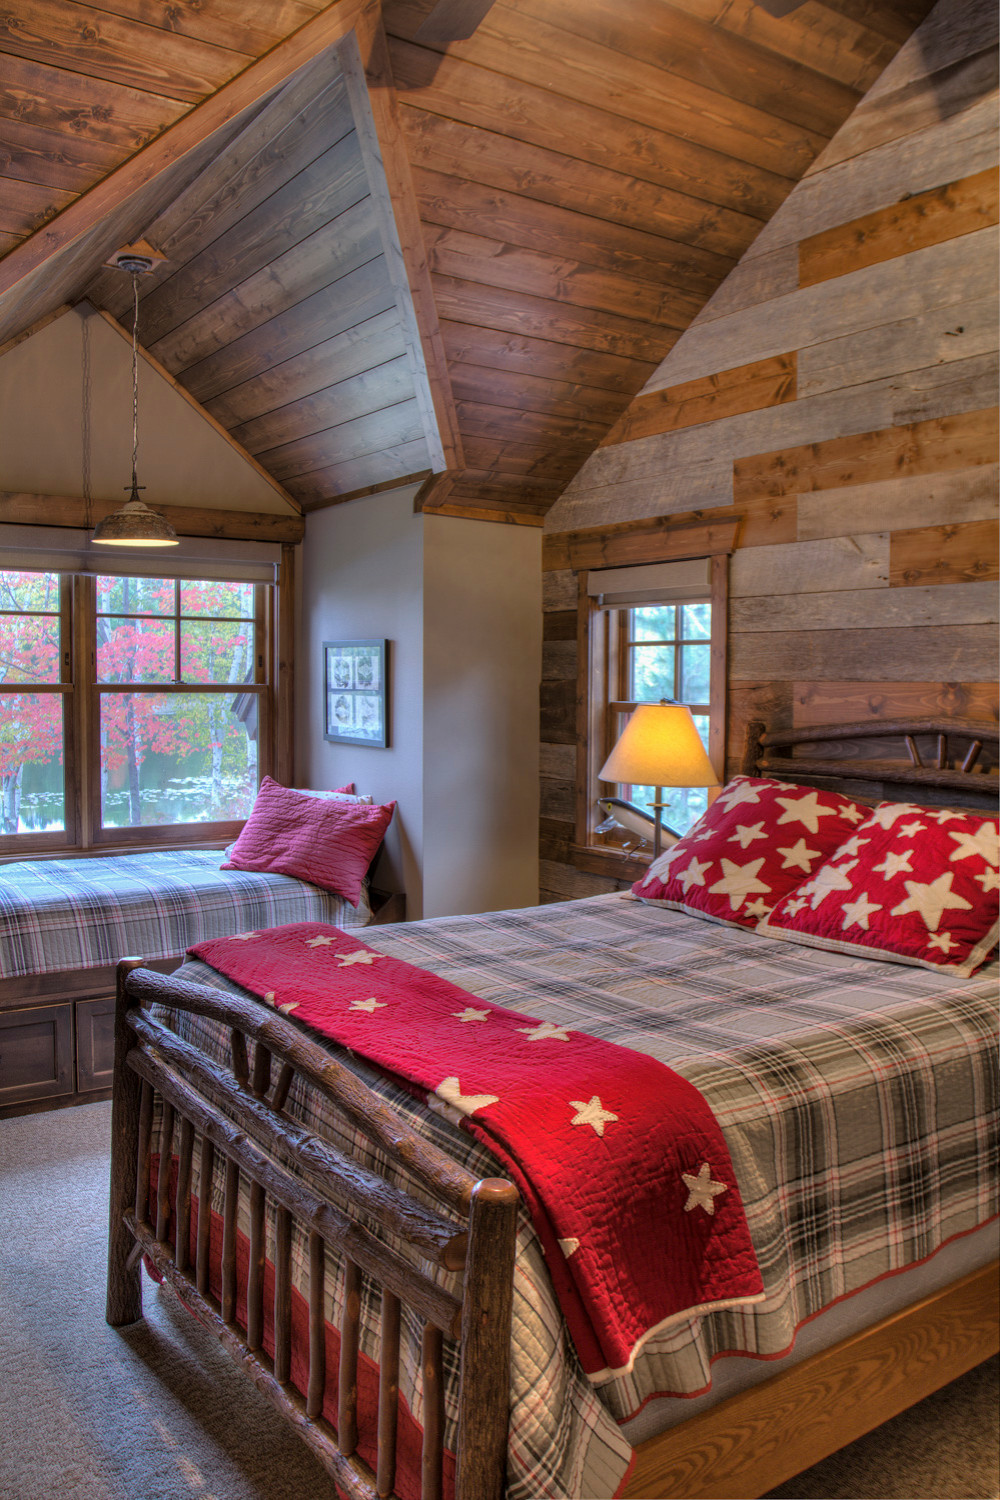 Cabin style bedroom with colorful bedding that adds much more than just bright hues